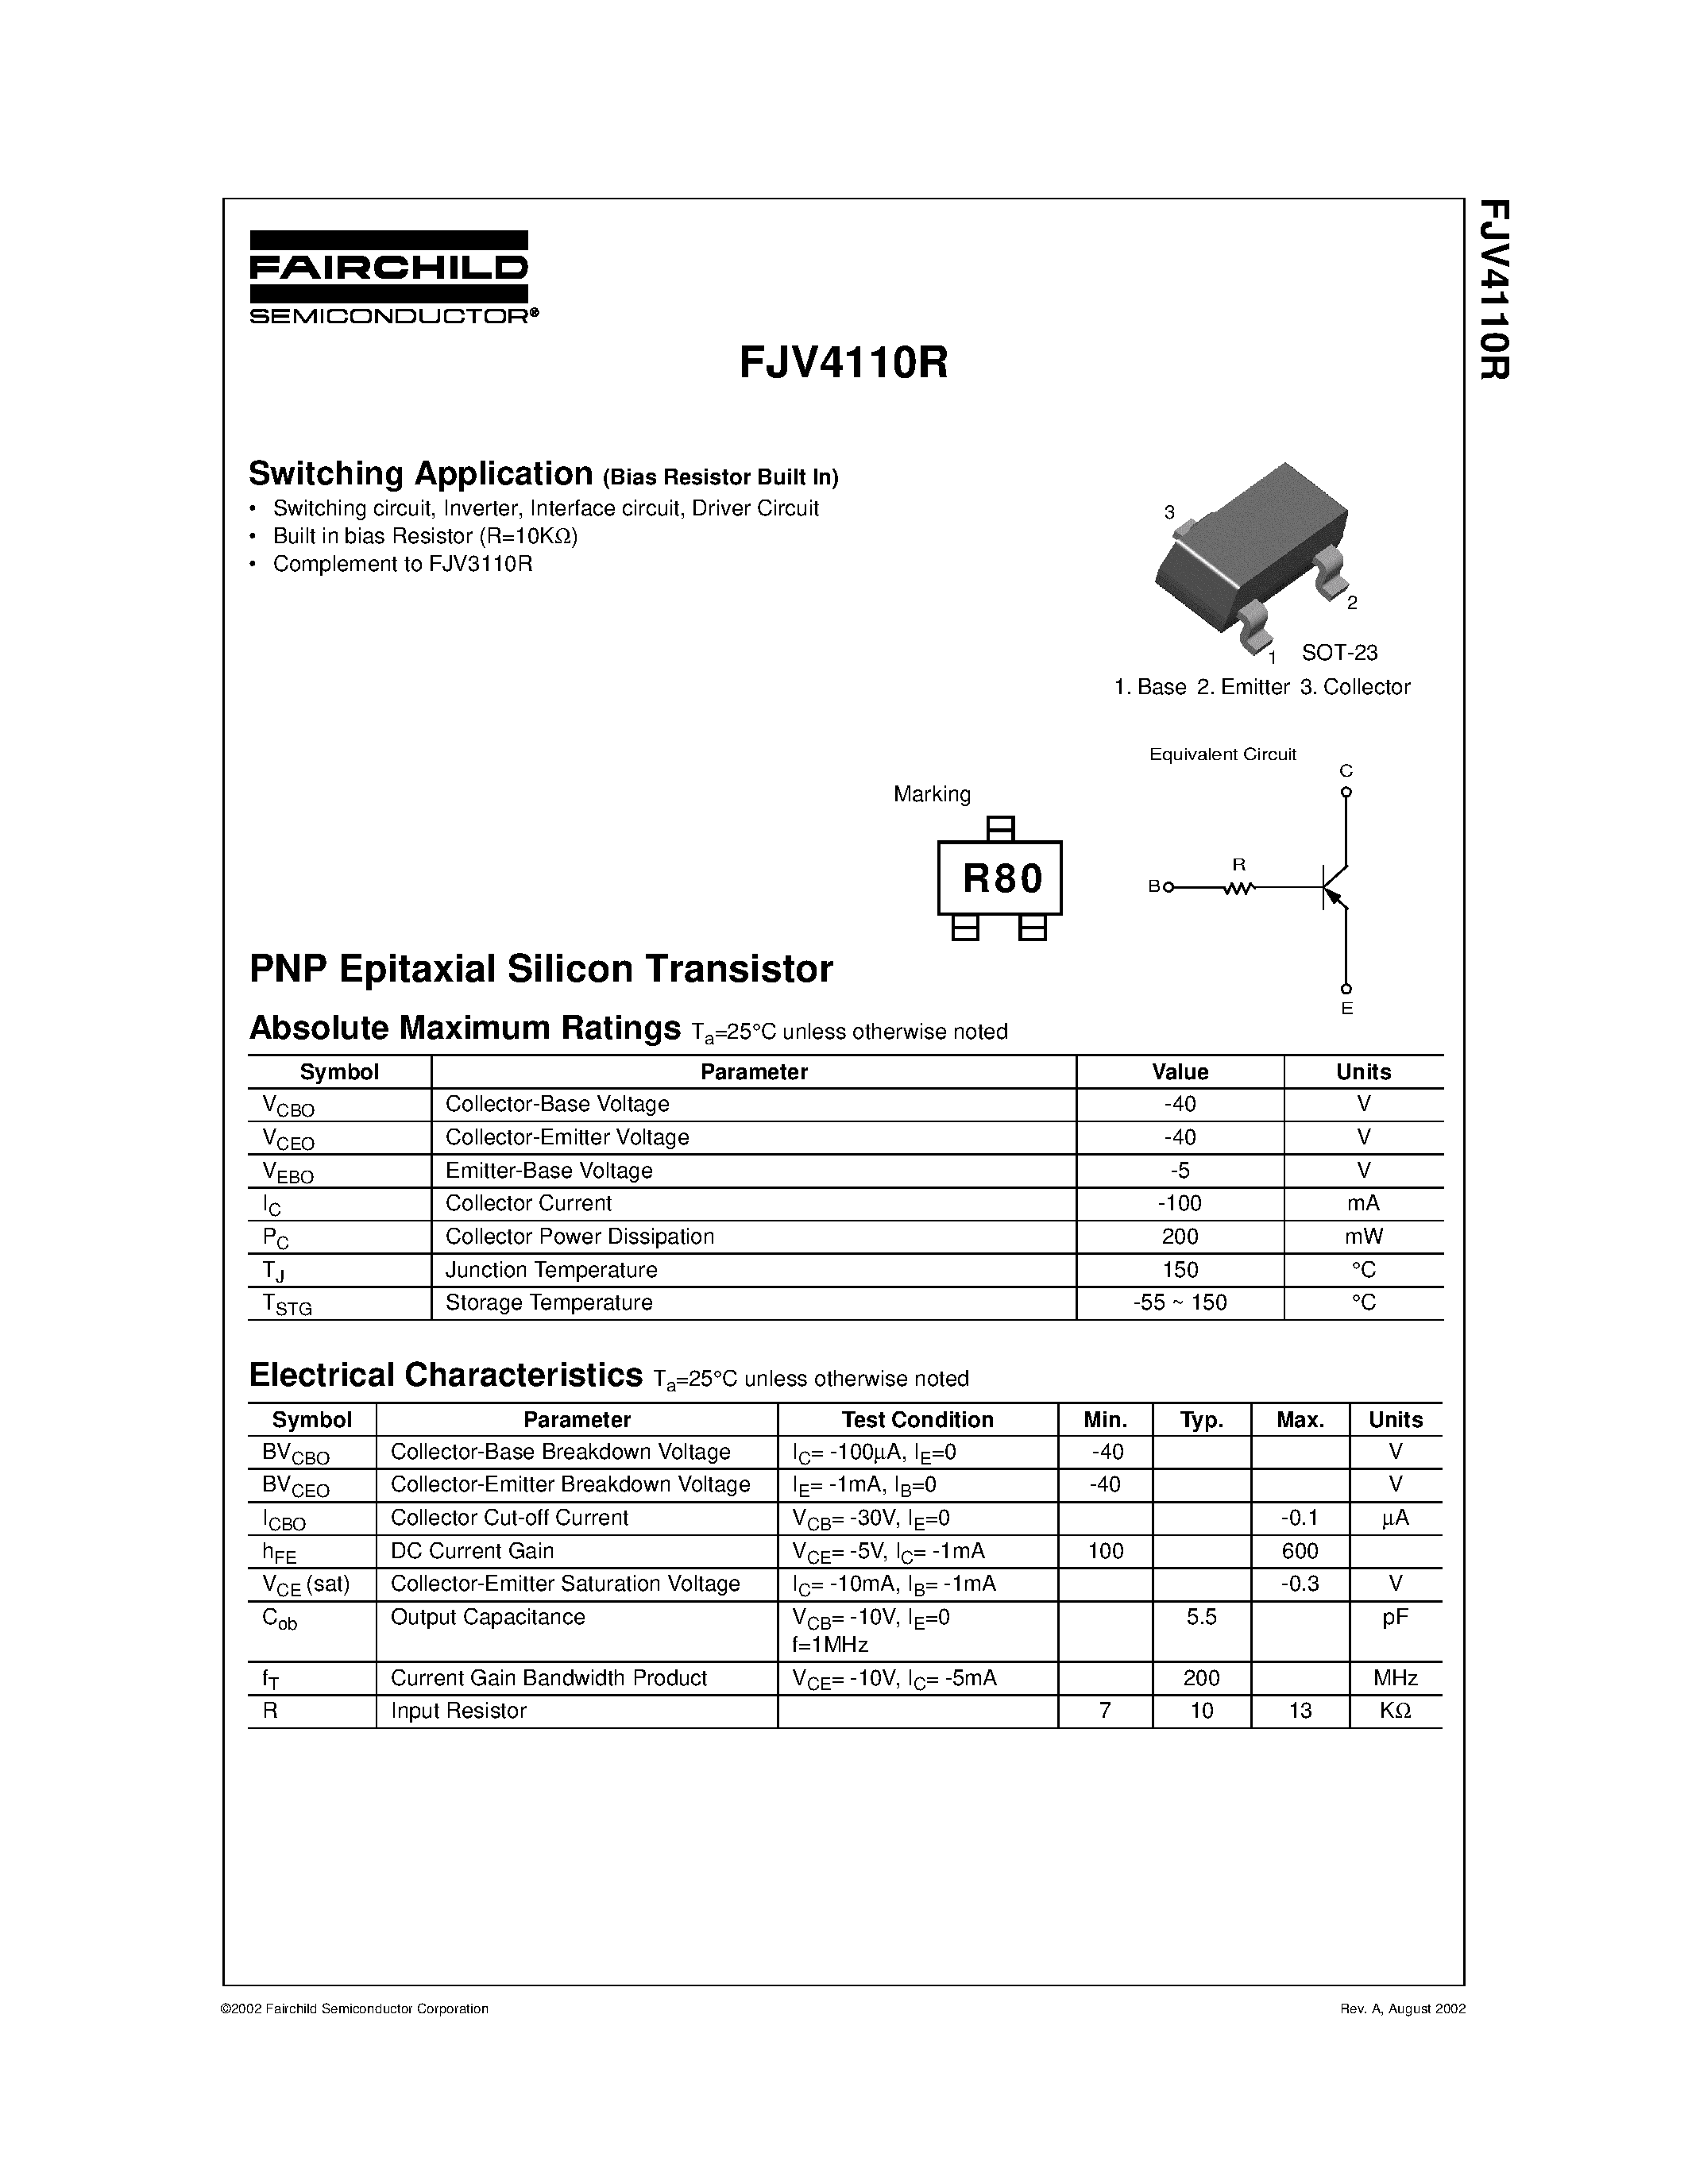 Datasheet FJV4110R - PNP Epitaxial Silicon Transistor page 1